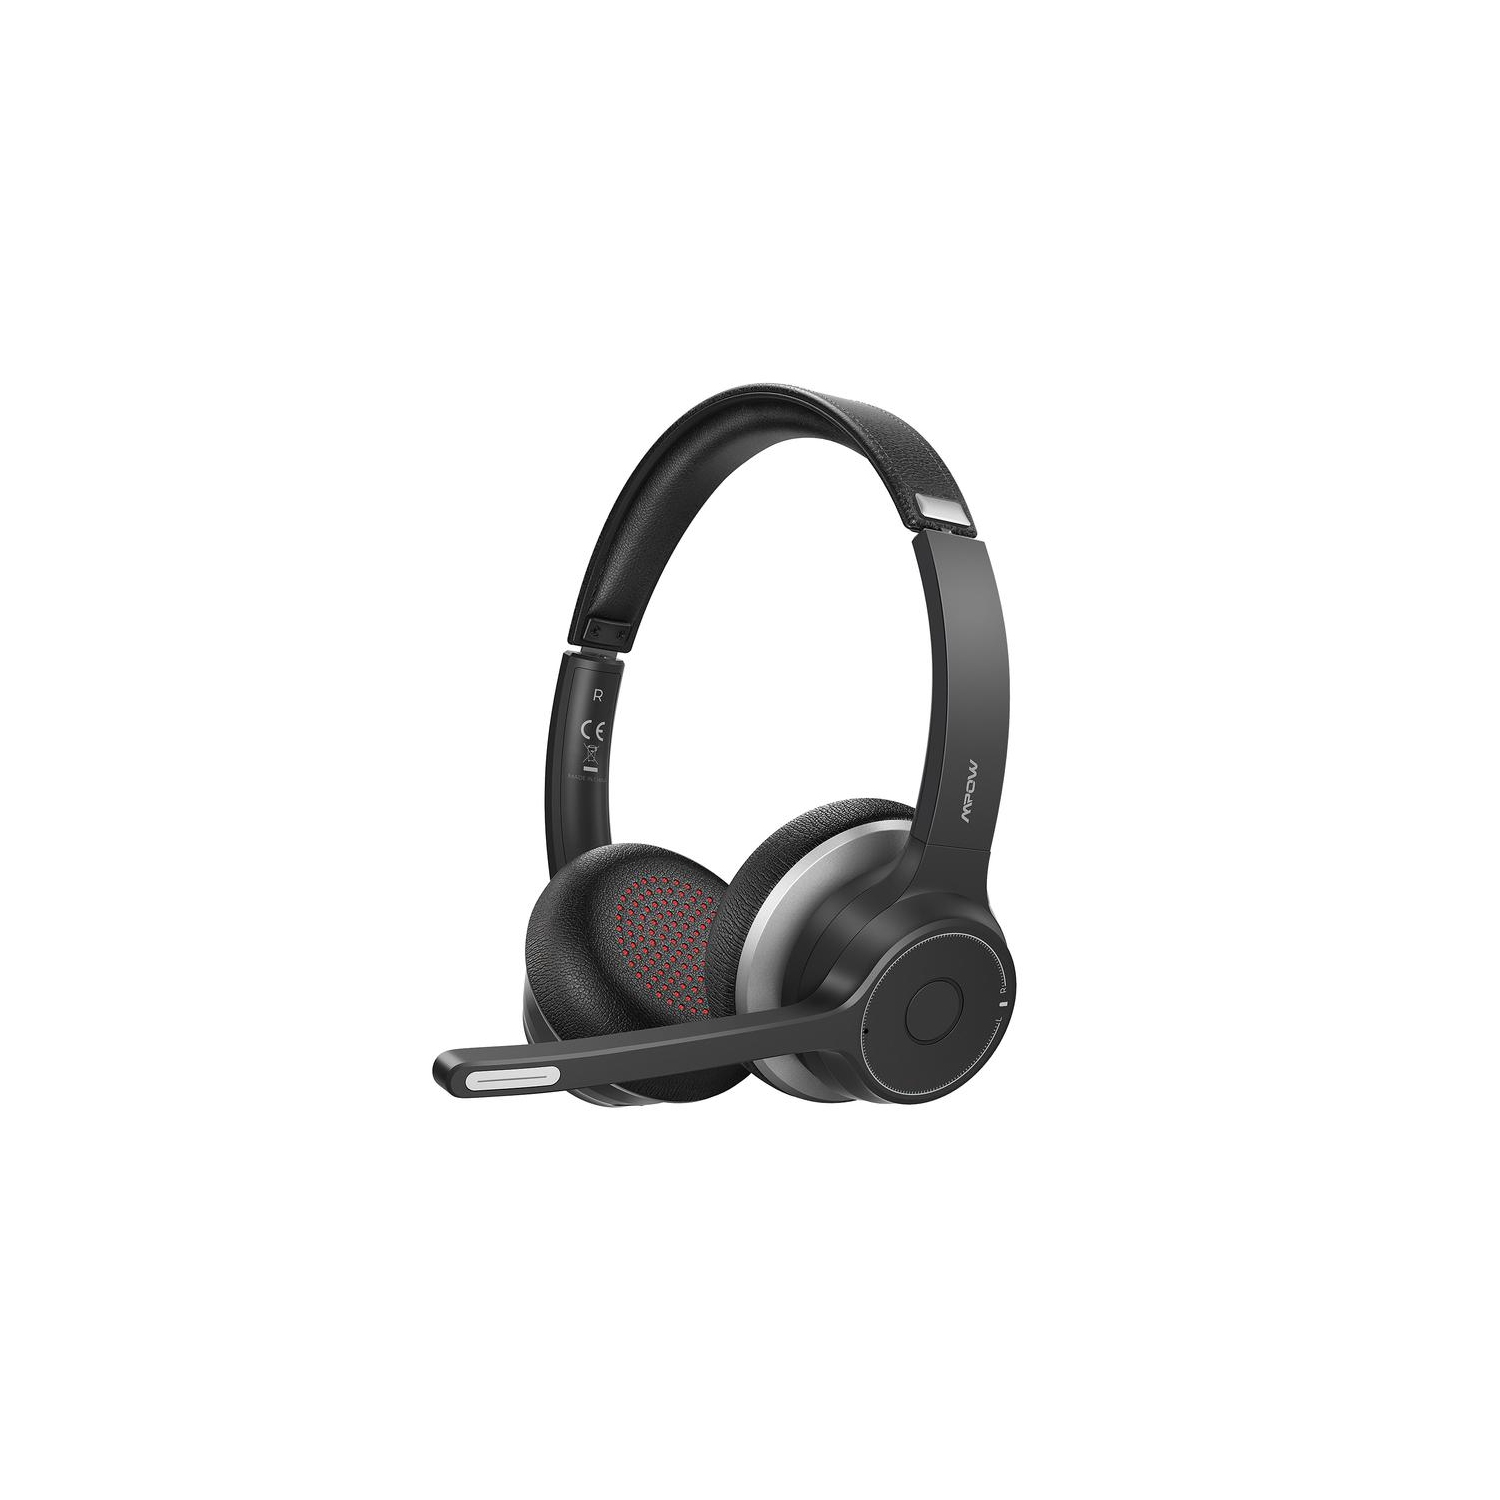 Mpow HC5 V5.0 Bluetooth Headset with Dual Mic, 22+Hrs Talk Time with CVC8.0 Noise Canceling Microphone - Open Box